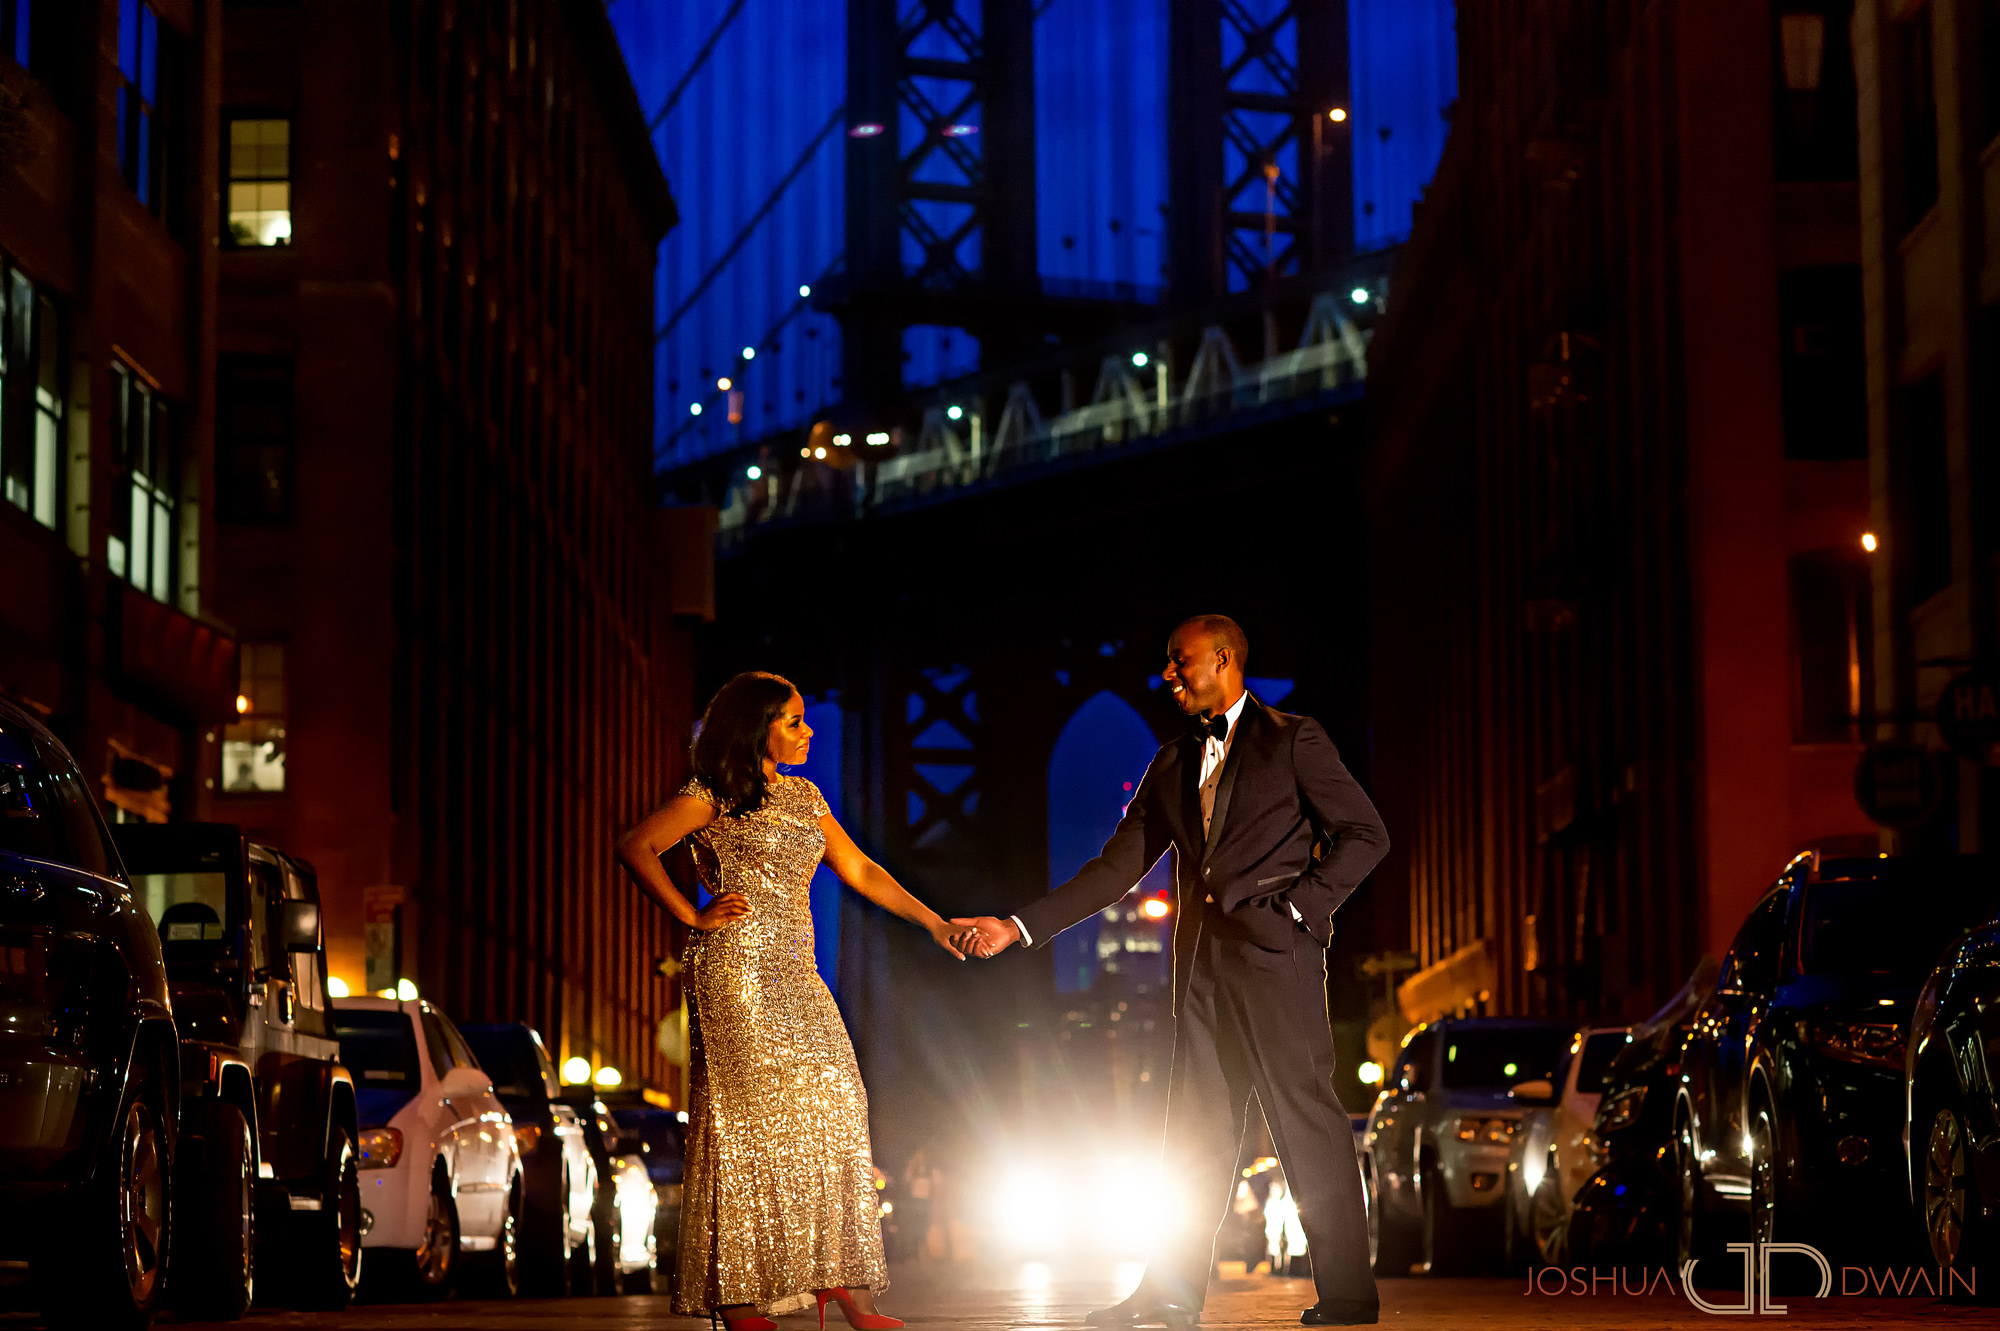 Penelope & Joseph's Engagement Session in Dumbo, Brooklyn, NYC